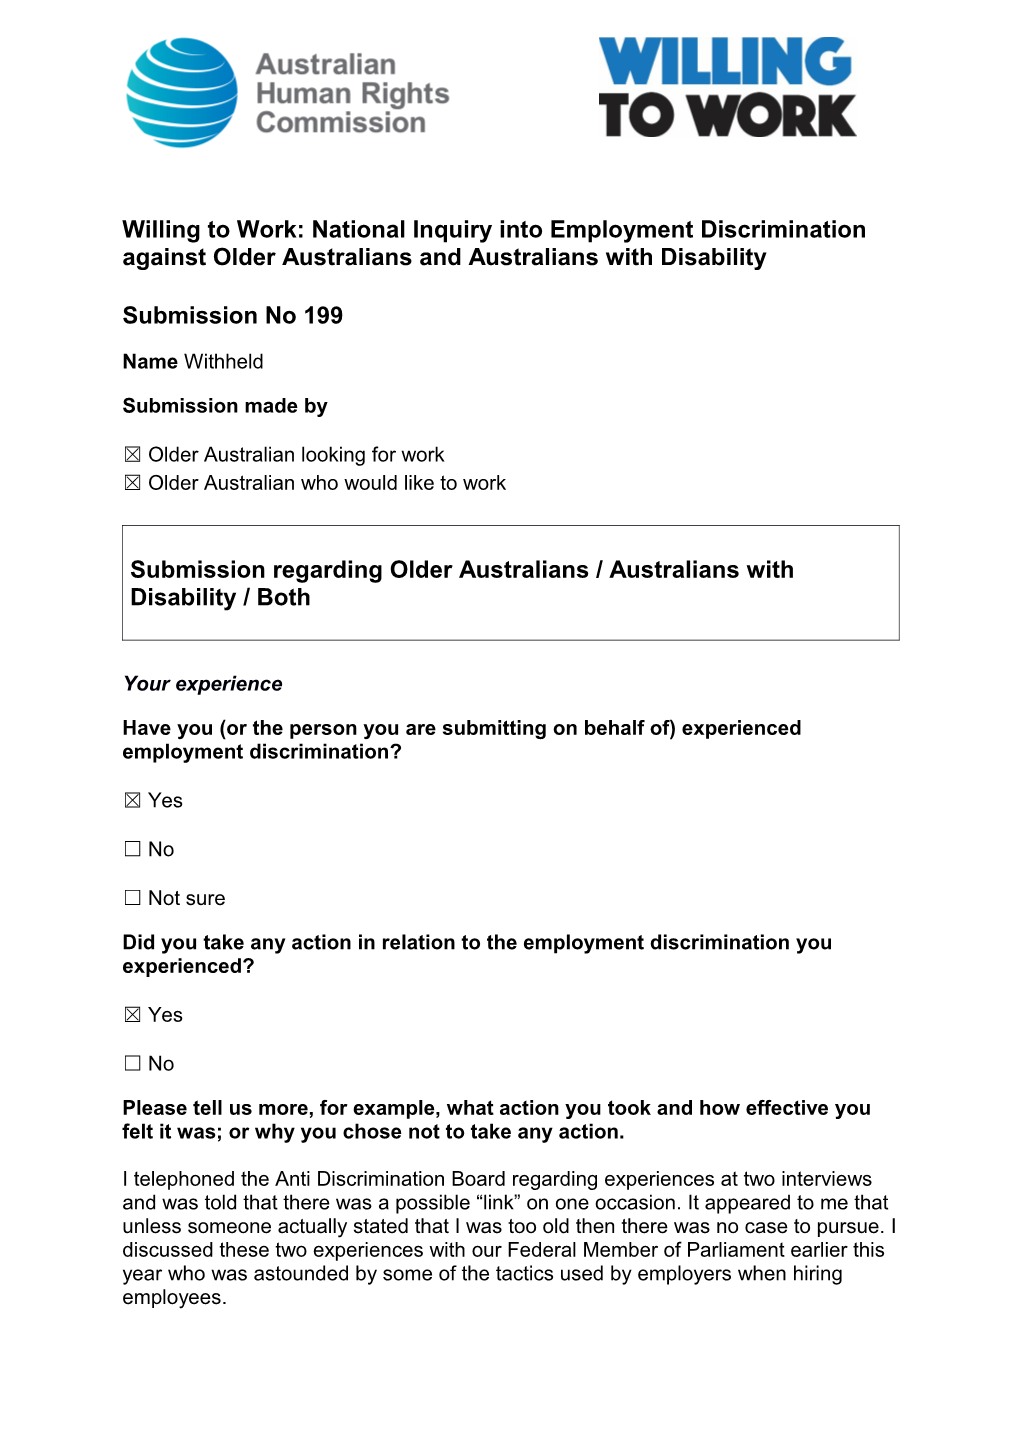 Willing to Work: National Inquiry Into Employment Discrimination Against Older Australians s2